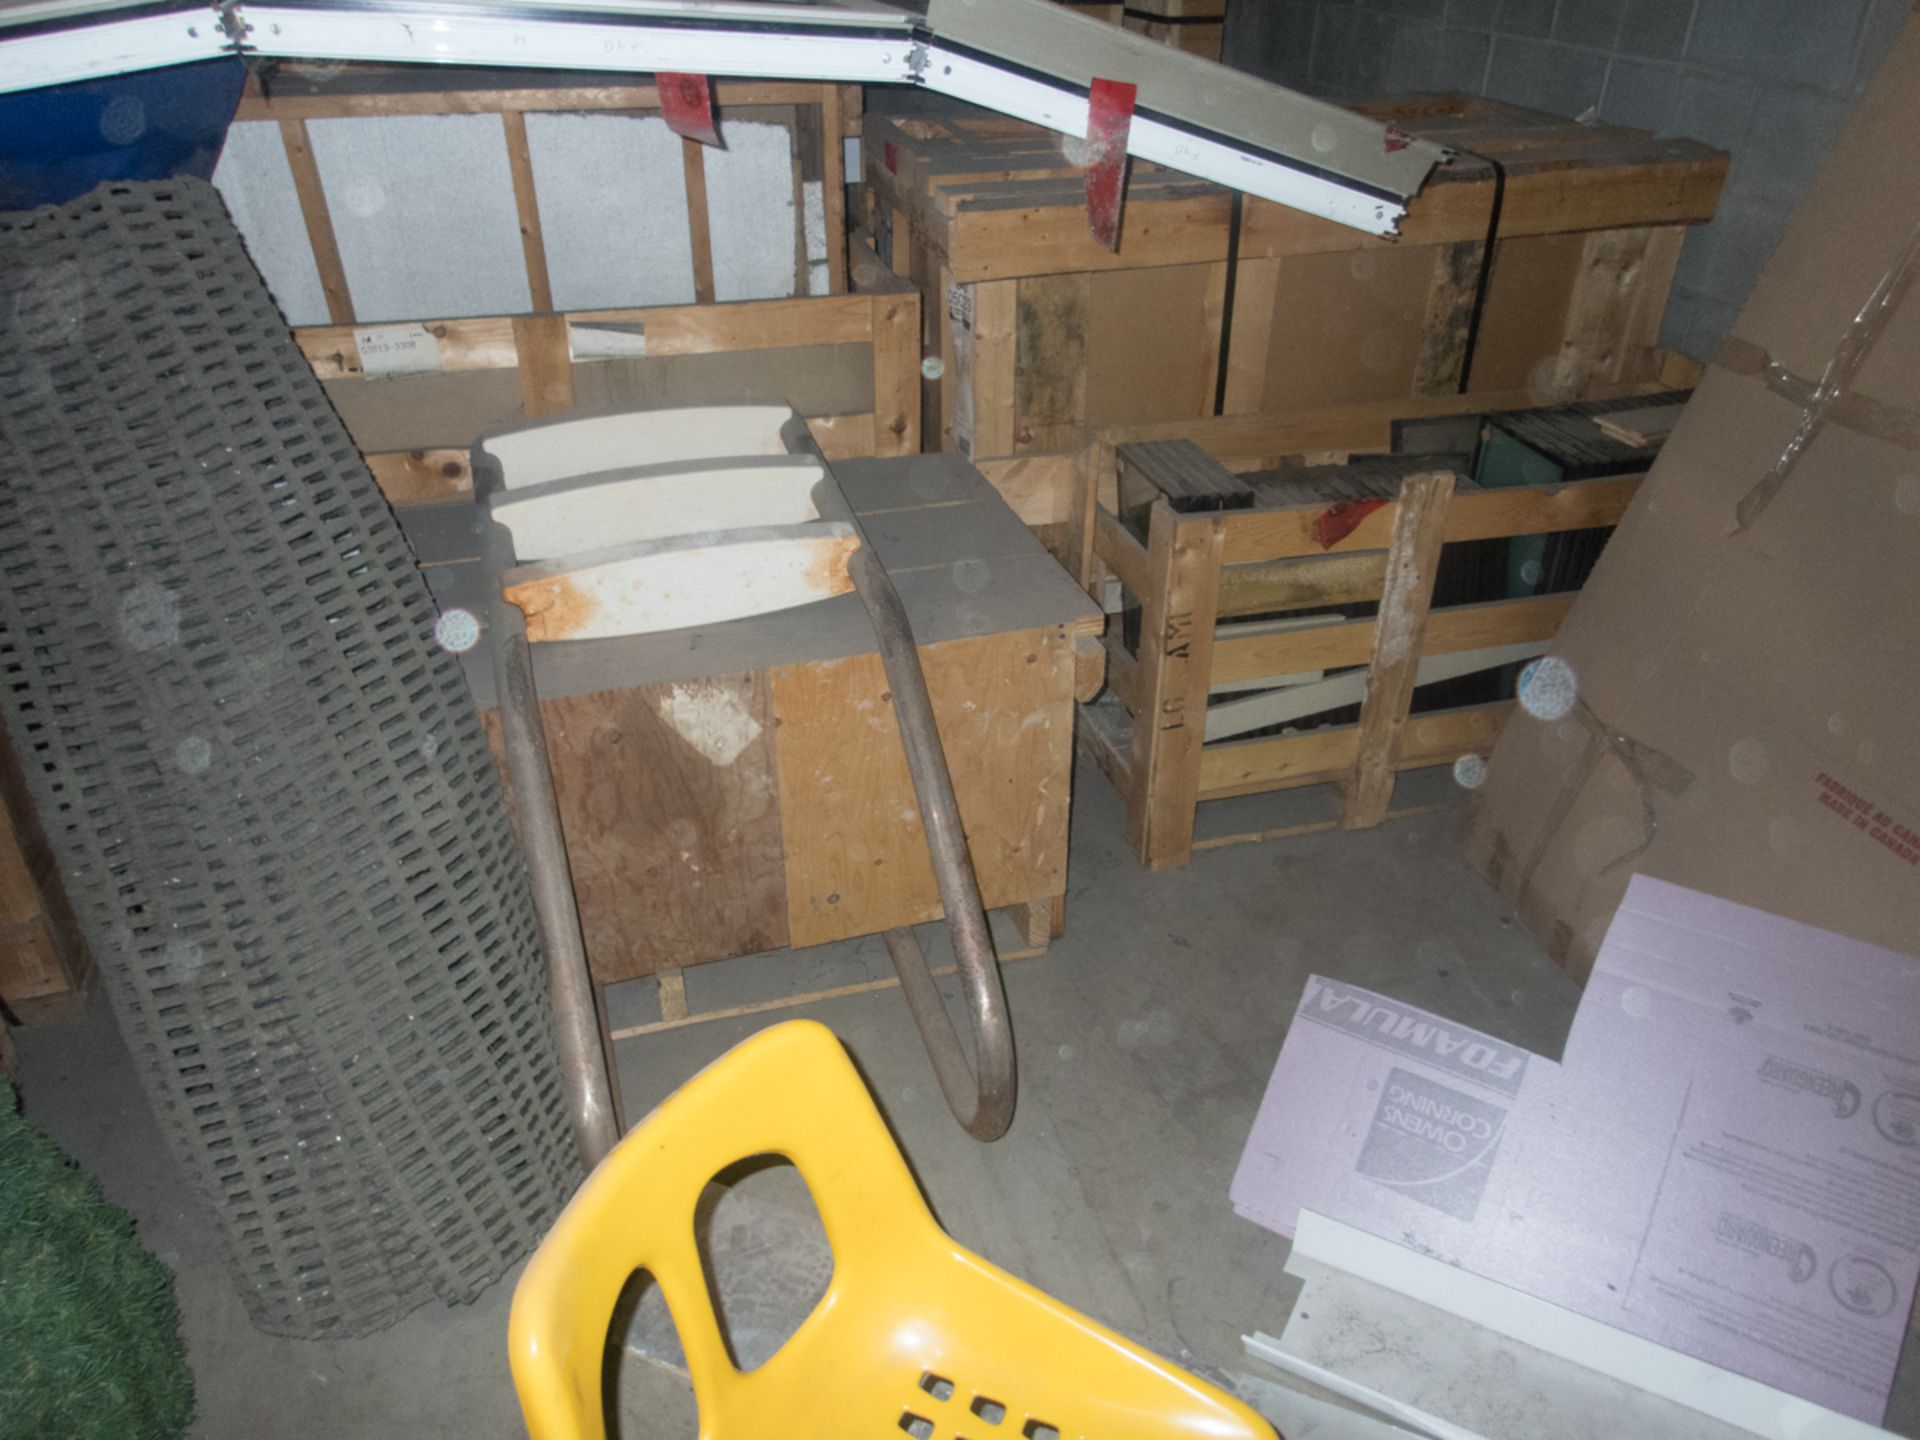 LOT OF ASSORTED STYROFOAM, INSULATION PANELS, GLASS ETC (BASSINETTE/ANTIQUES NOT INCLUDED)